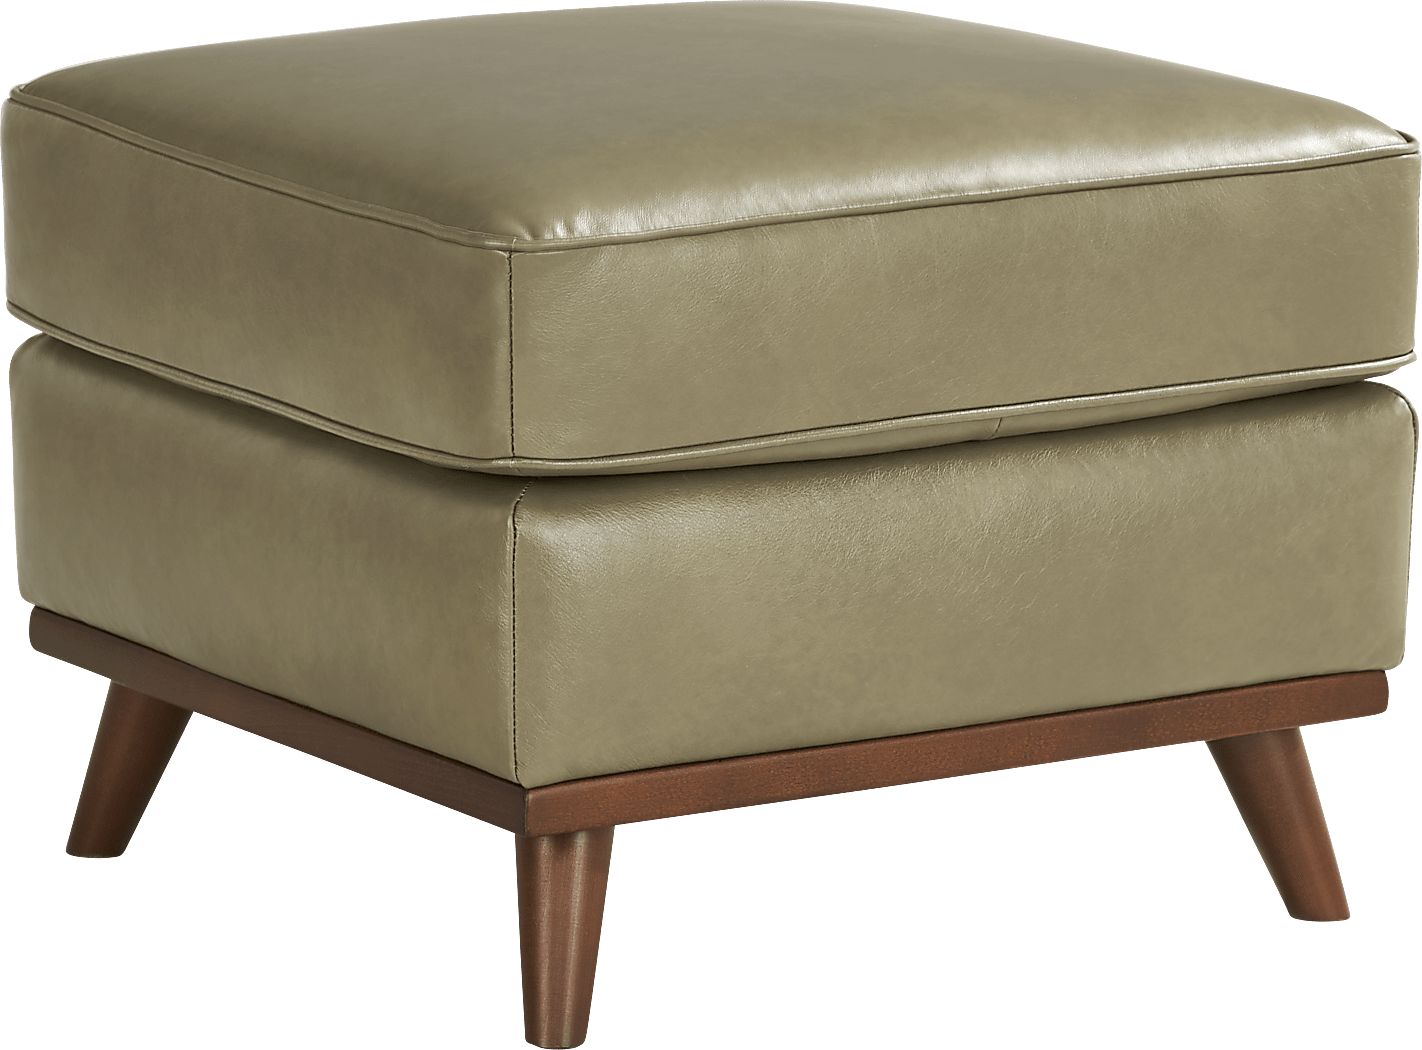 Duluth Olive Leather Ottoman